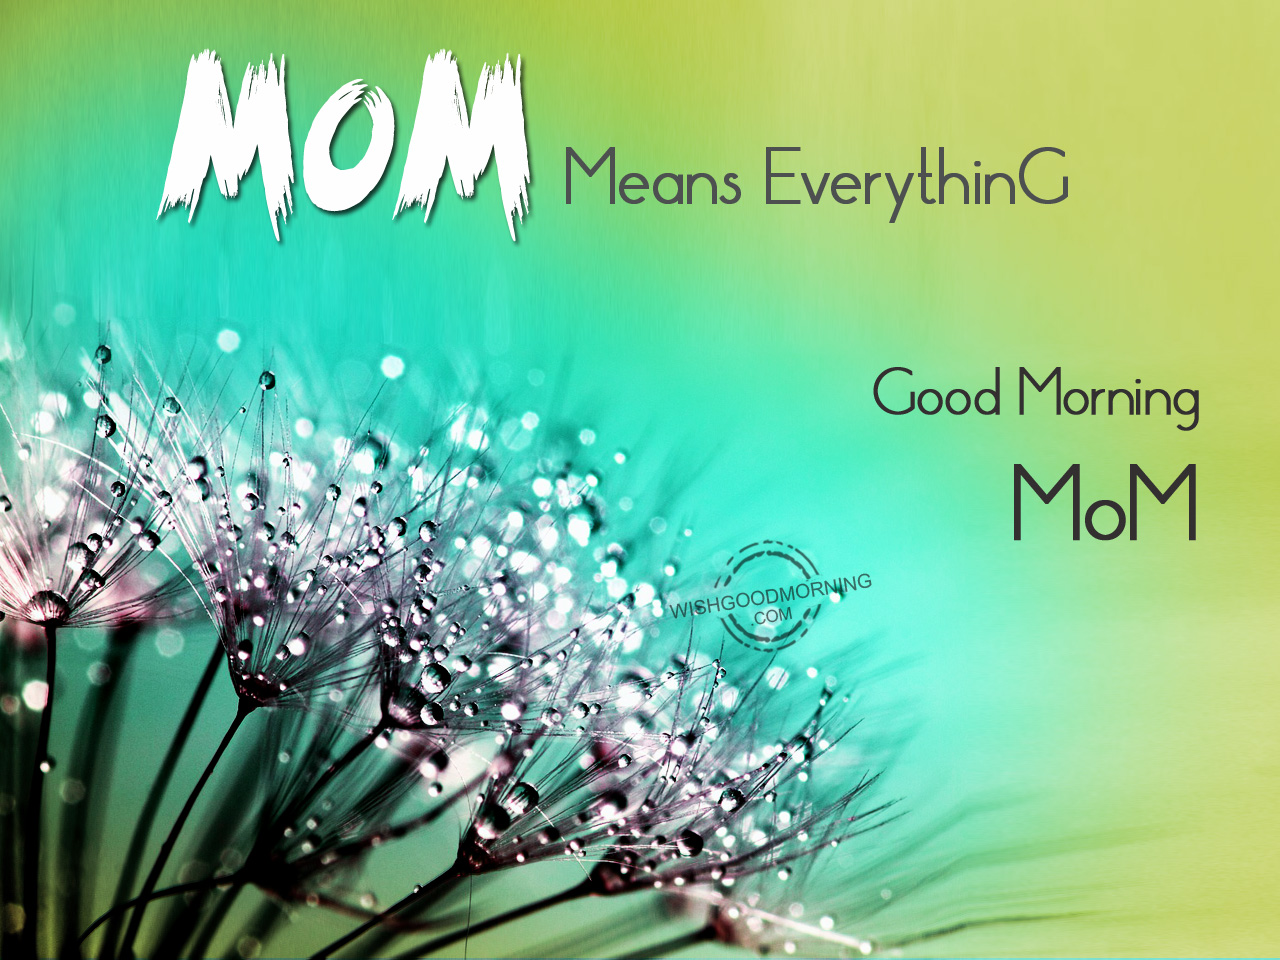 a href="https://www.wishgoodmorning.com/good-morning-wishes-for-mother/...